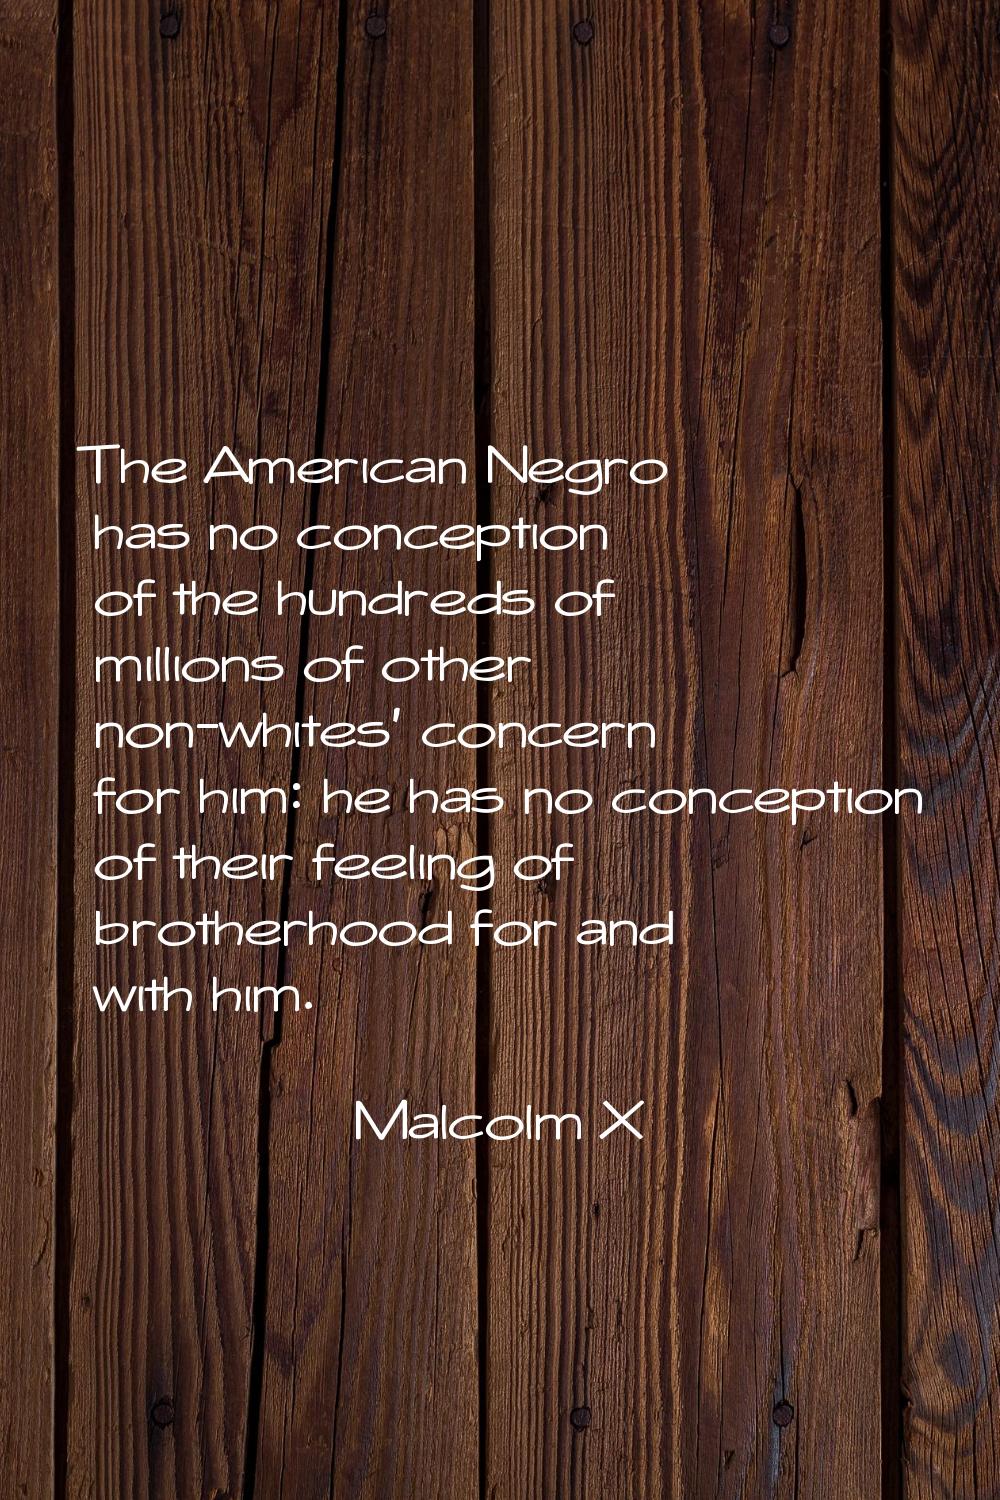 The American Negro has no conception of the hundreds of millions of other non-whites' concern for h